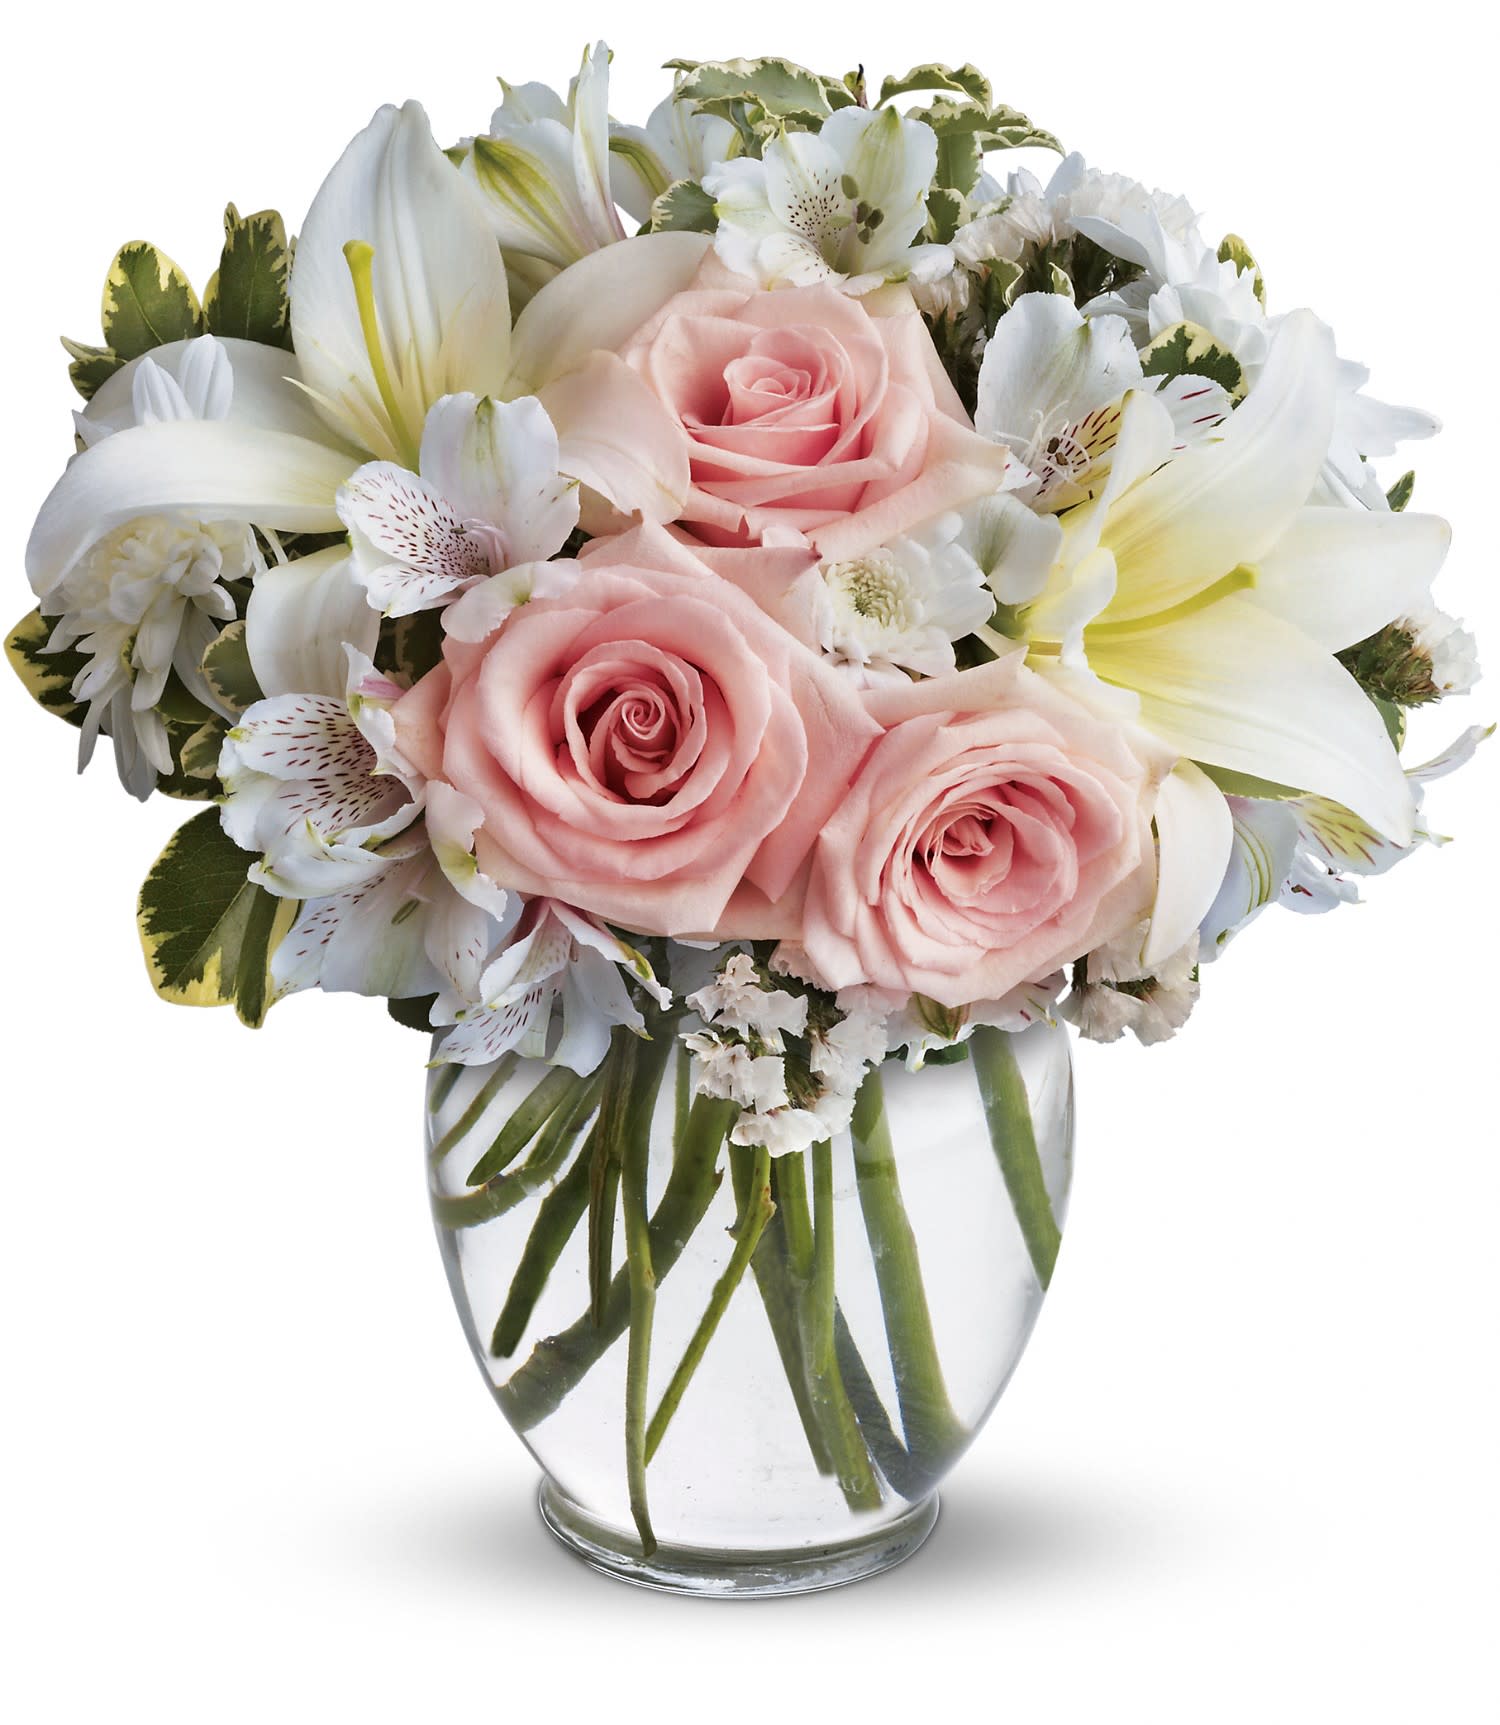 Arrive in Style by Teleflora - This beautiful bouquet will most certainly arrive in style! Ready for the runway, as it were. A delightful combination of light colors and lovely flowers, it's simply beautiful.